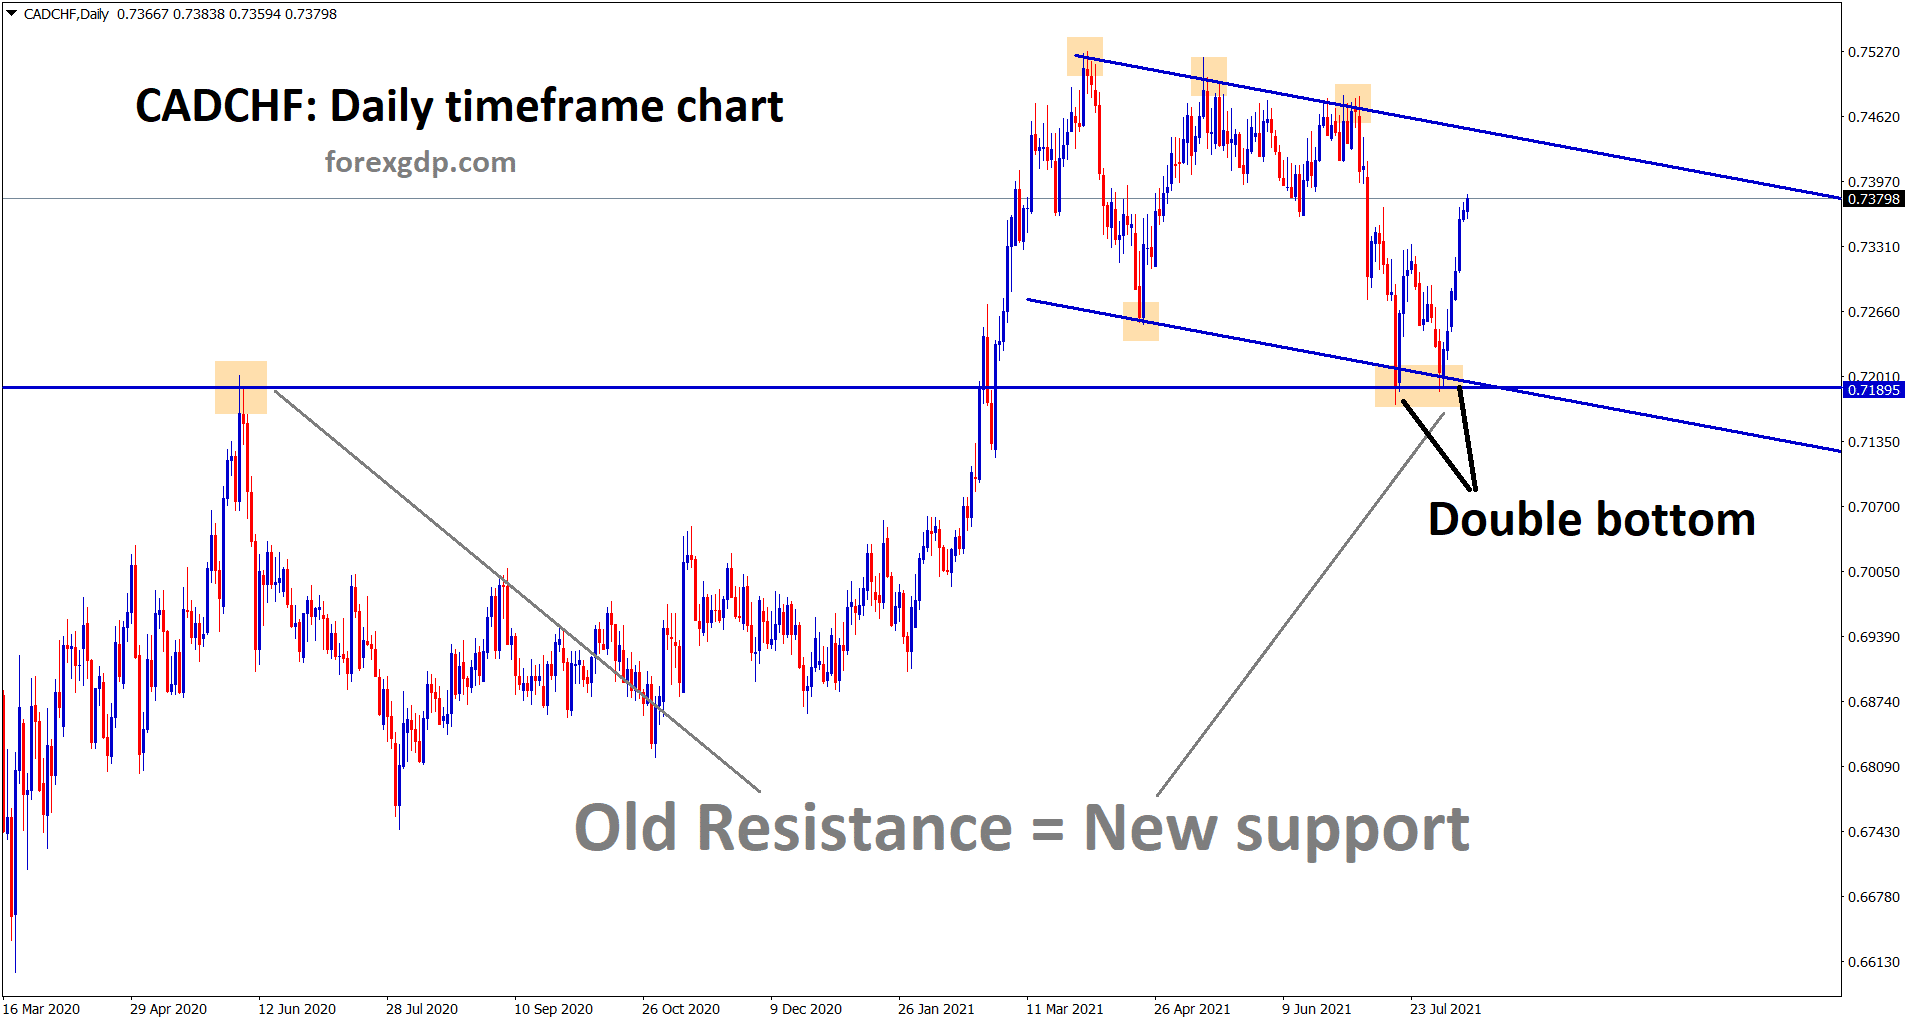 CADCHF is moving up faster after creating a double bottom and retest at the previous resistance area